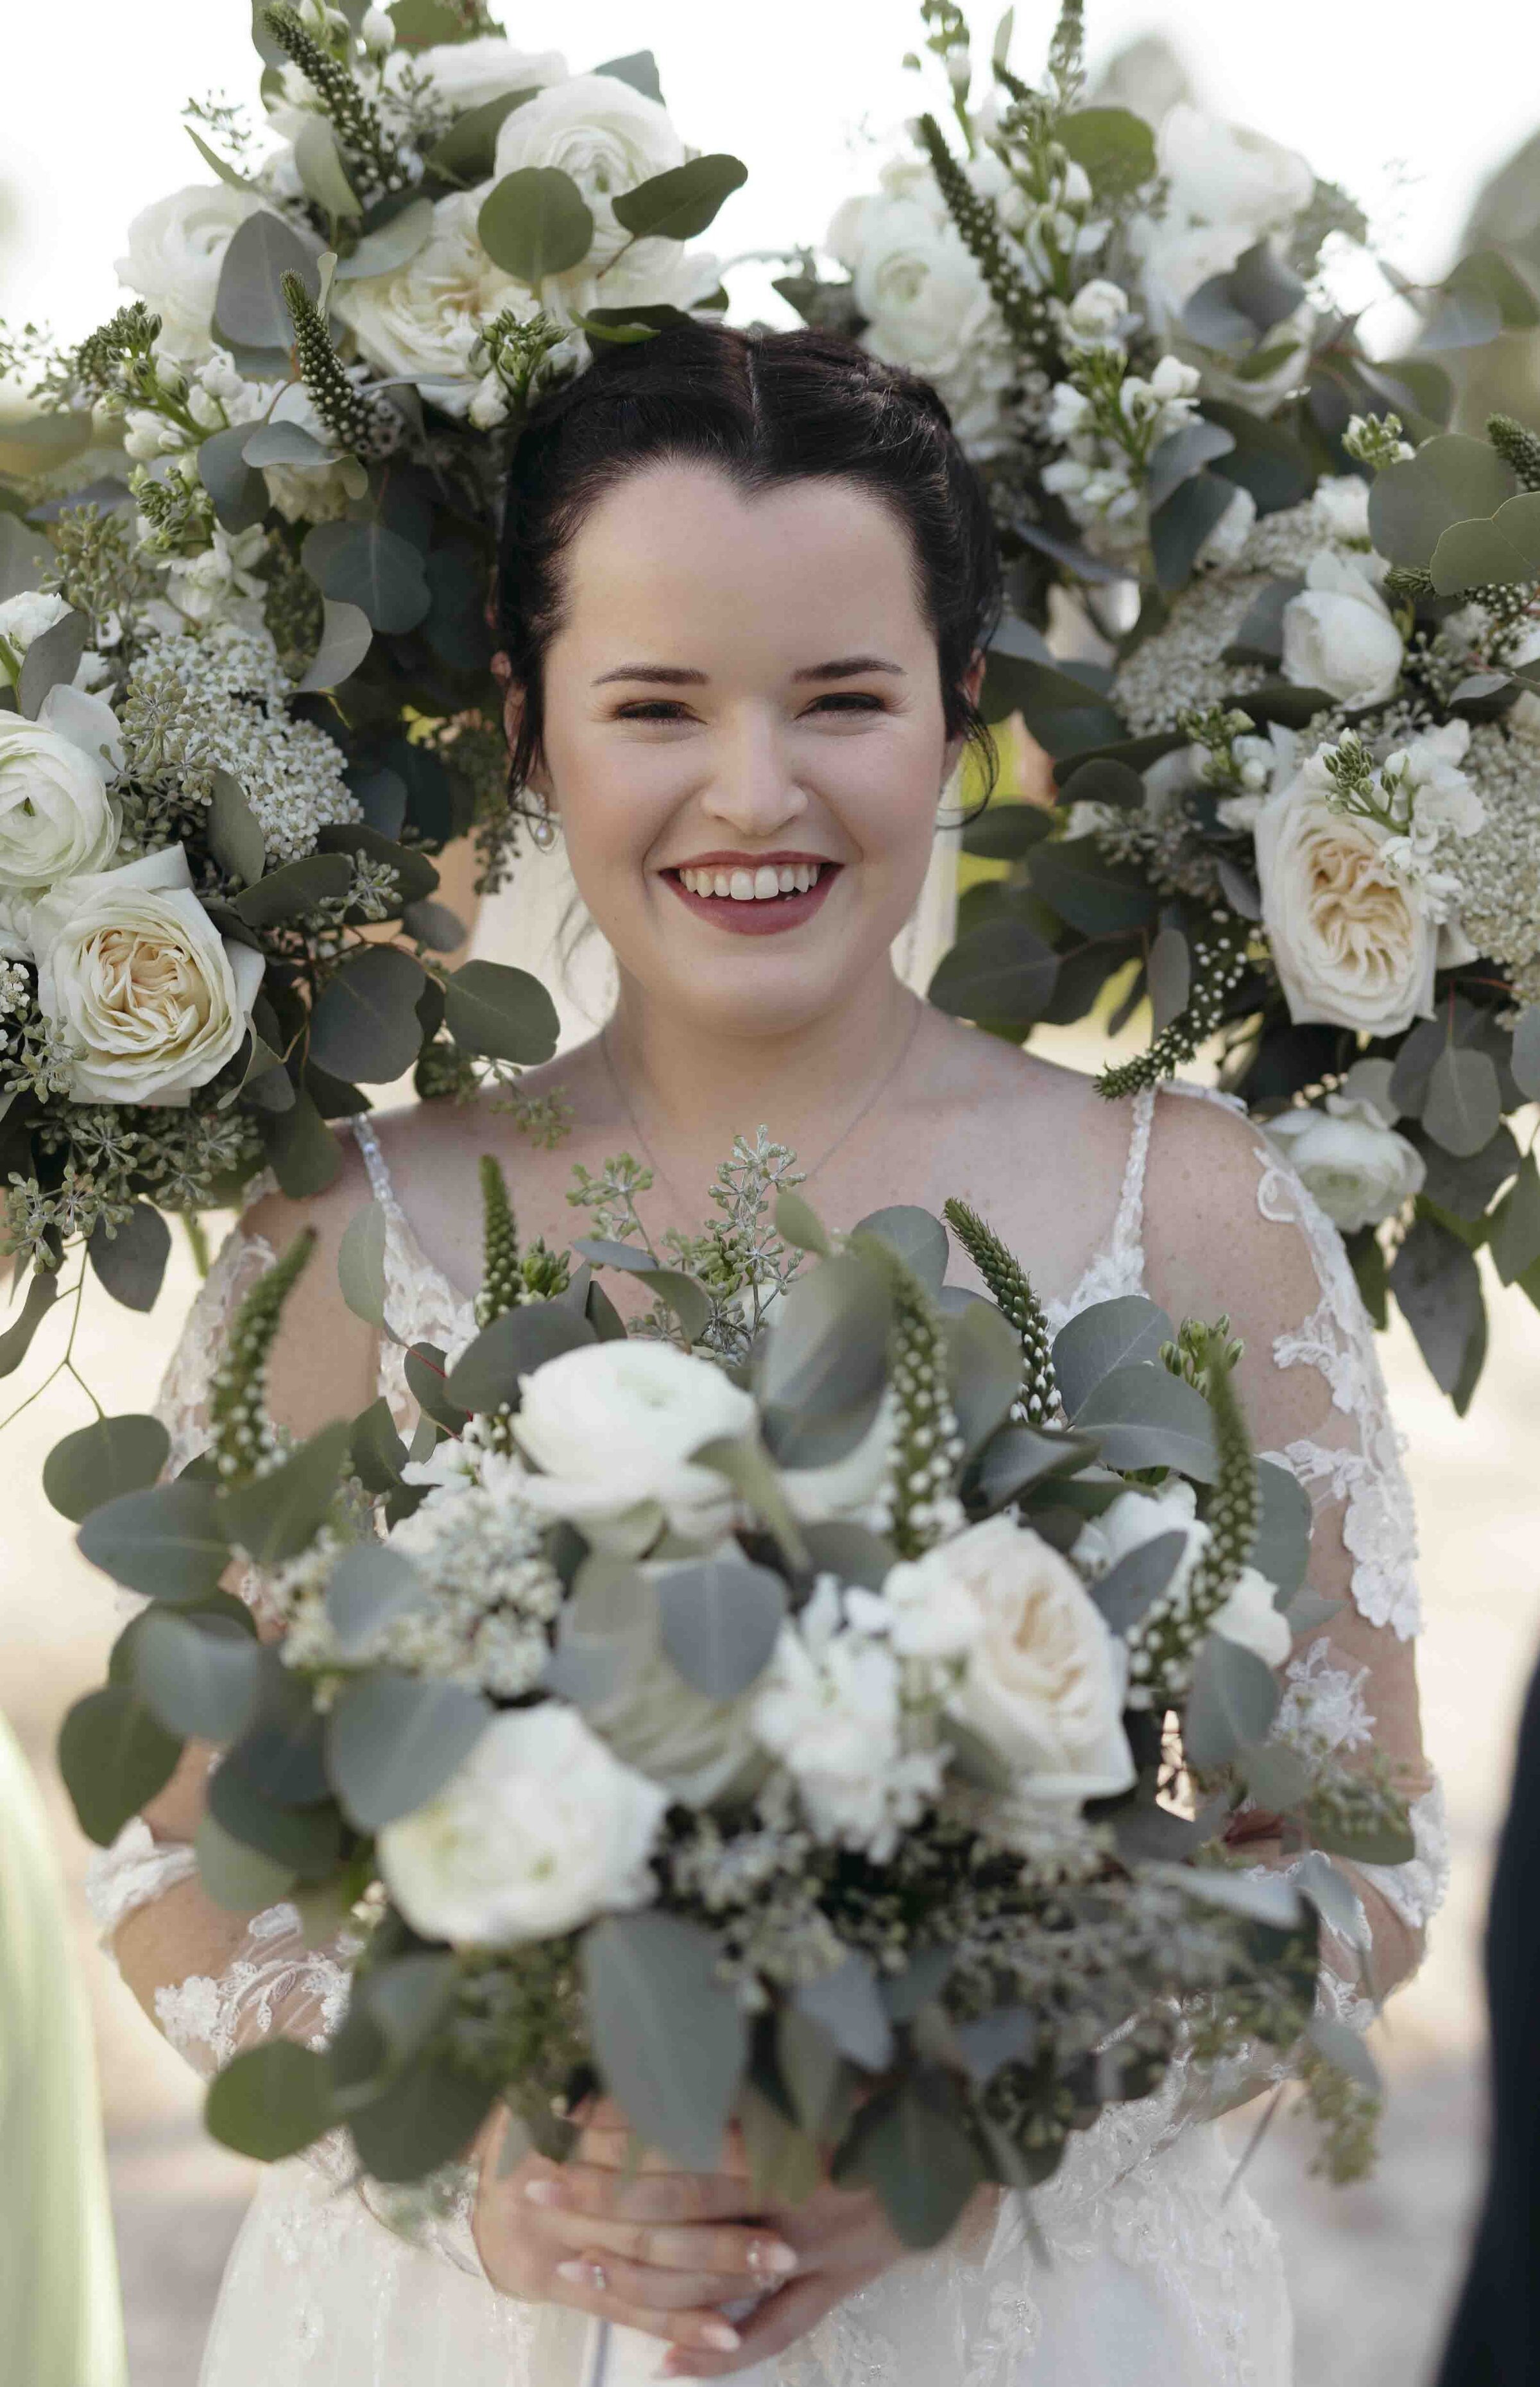 Bride smiling and holding a flower bouquet